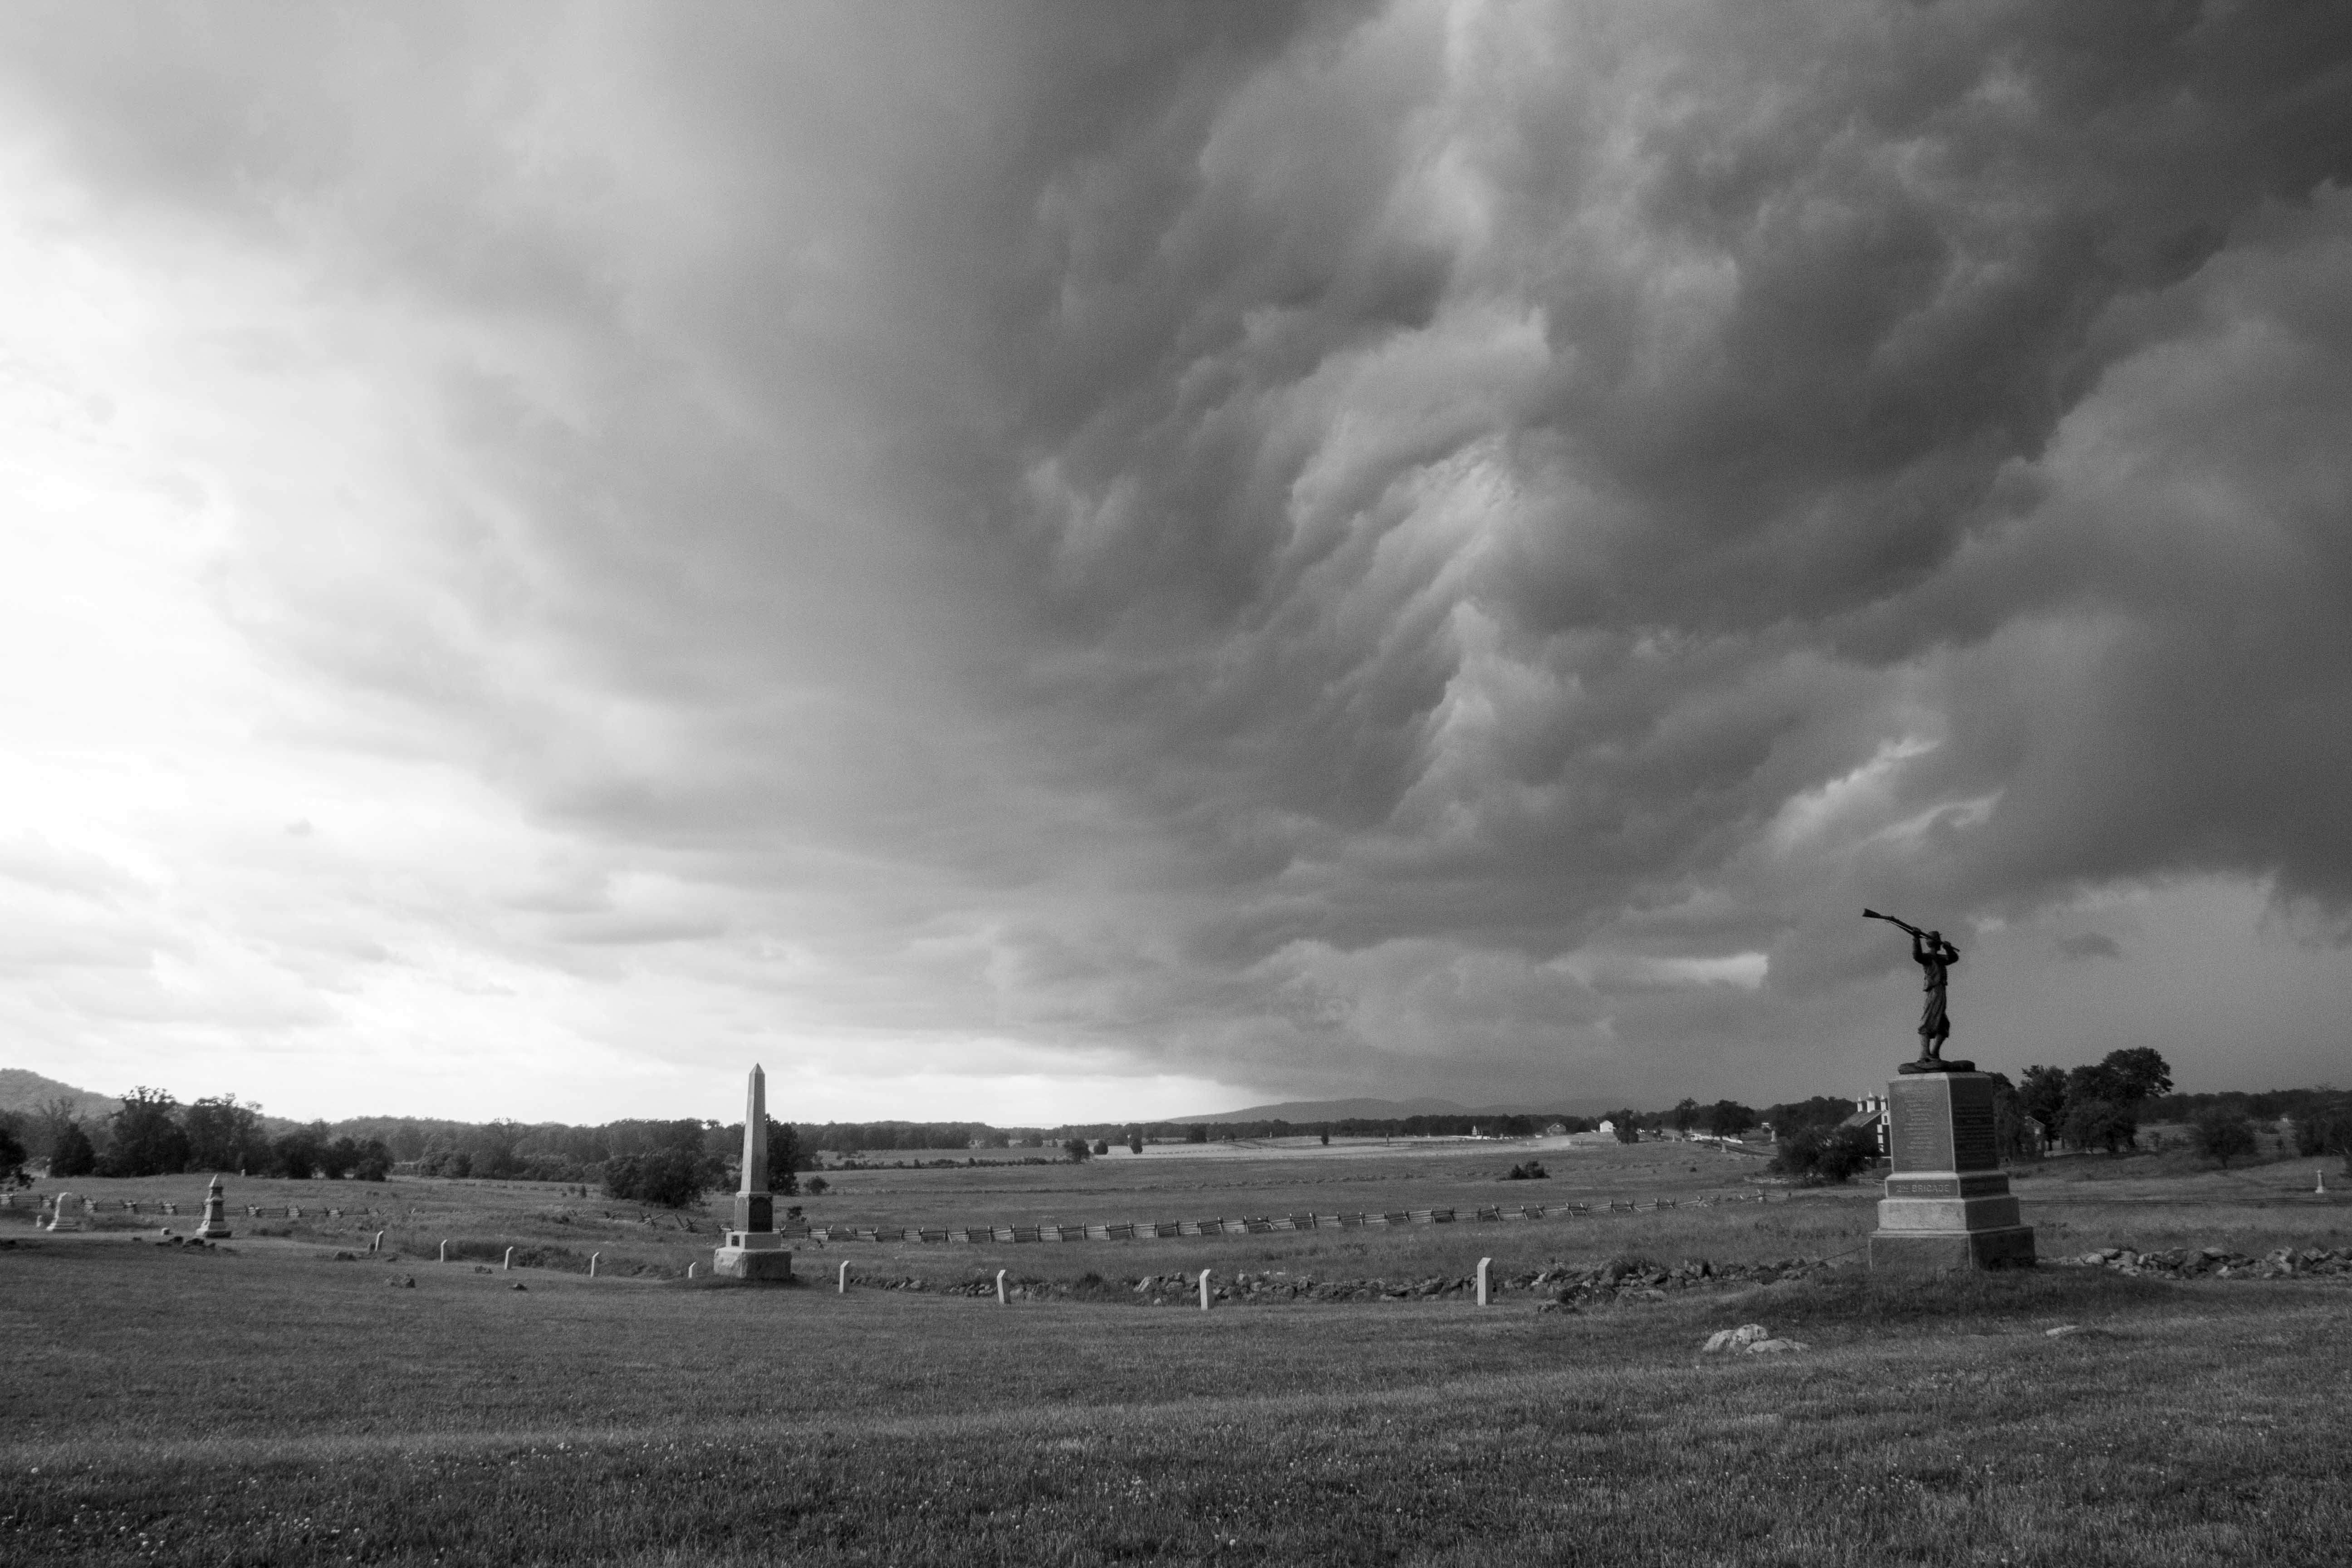 A black and white image with dark storm clouds rolling in over an open field with two monuments in the foreground and a barn in the background.